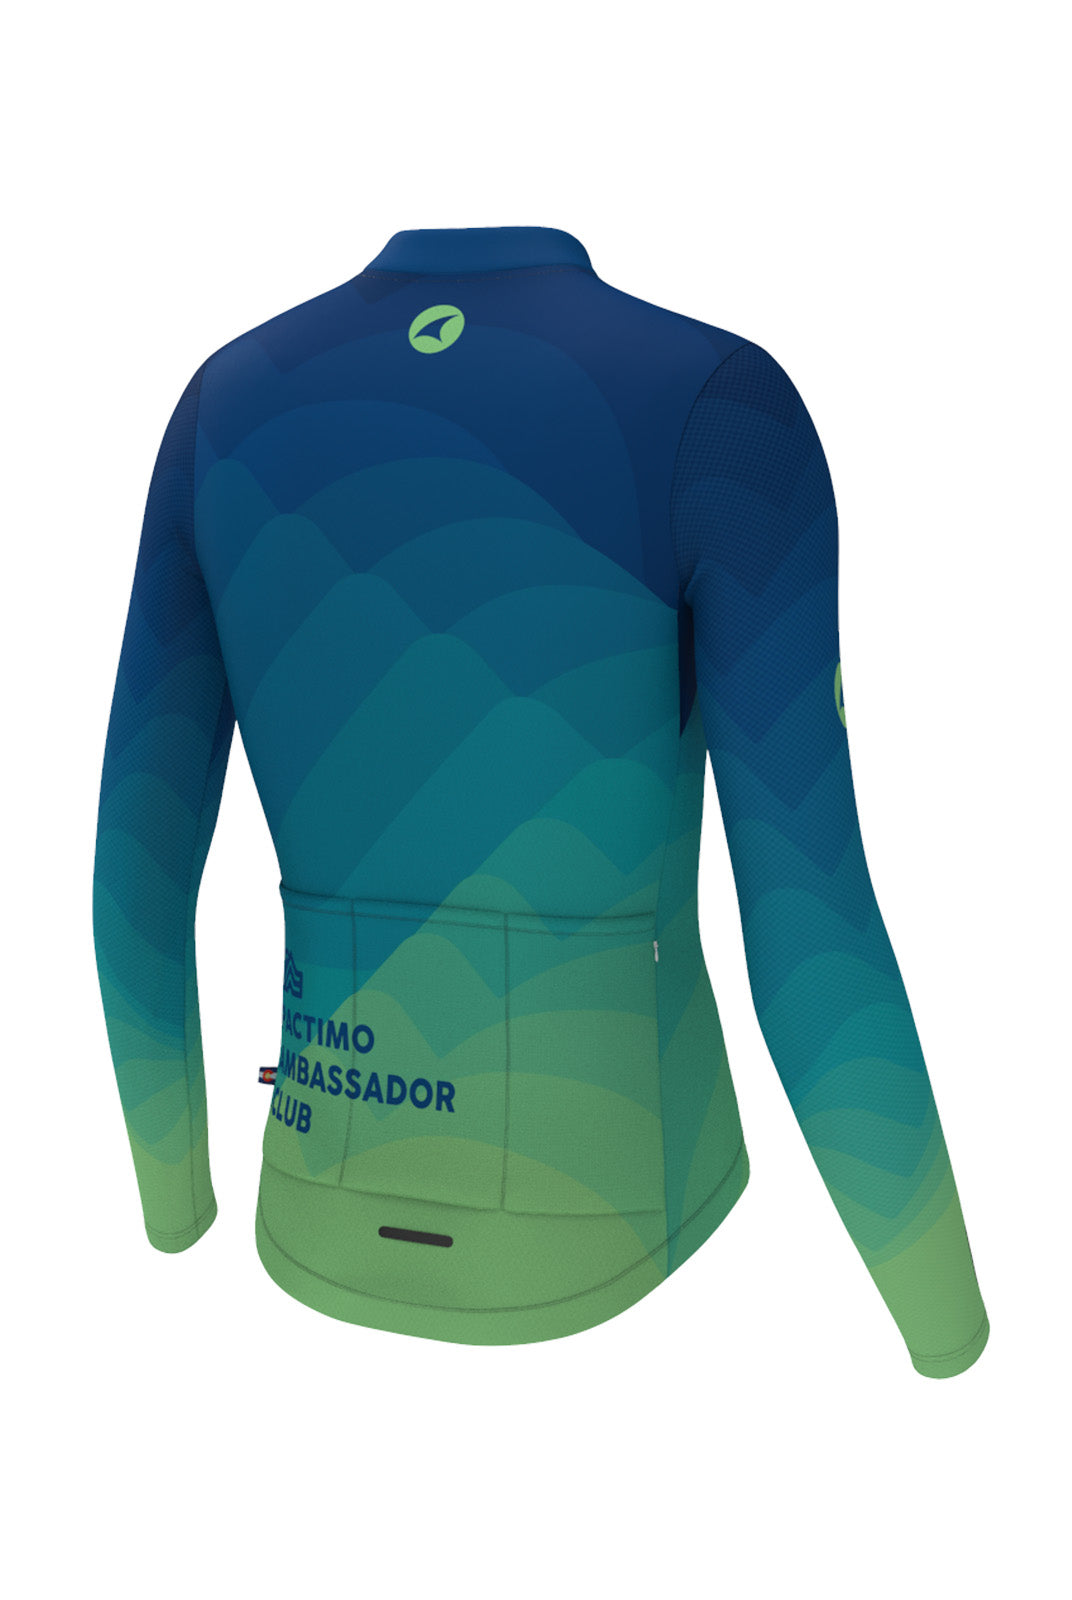 Men's PAC Ascent Aero Long Sleeve Cycling Jersey - Twighlight Back View